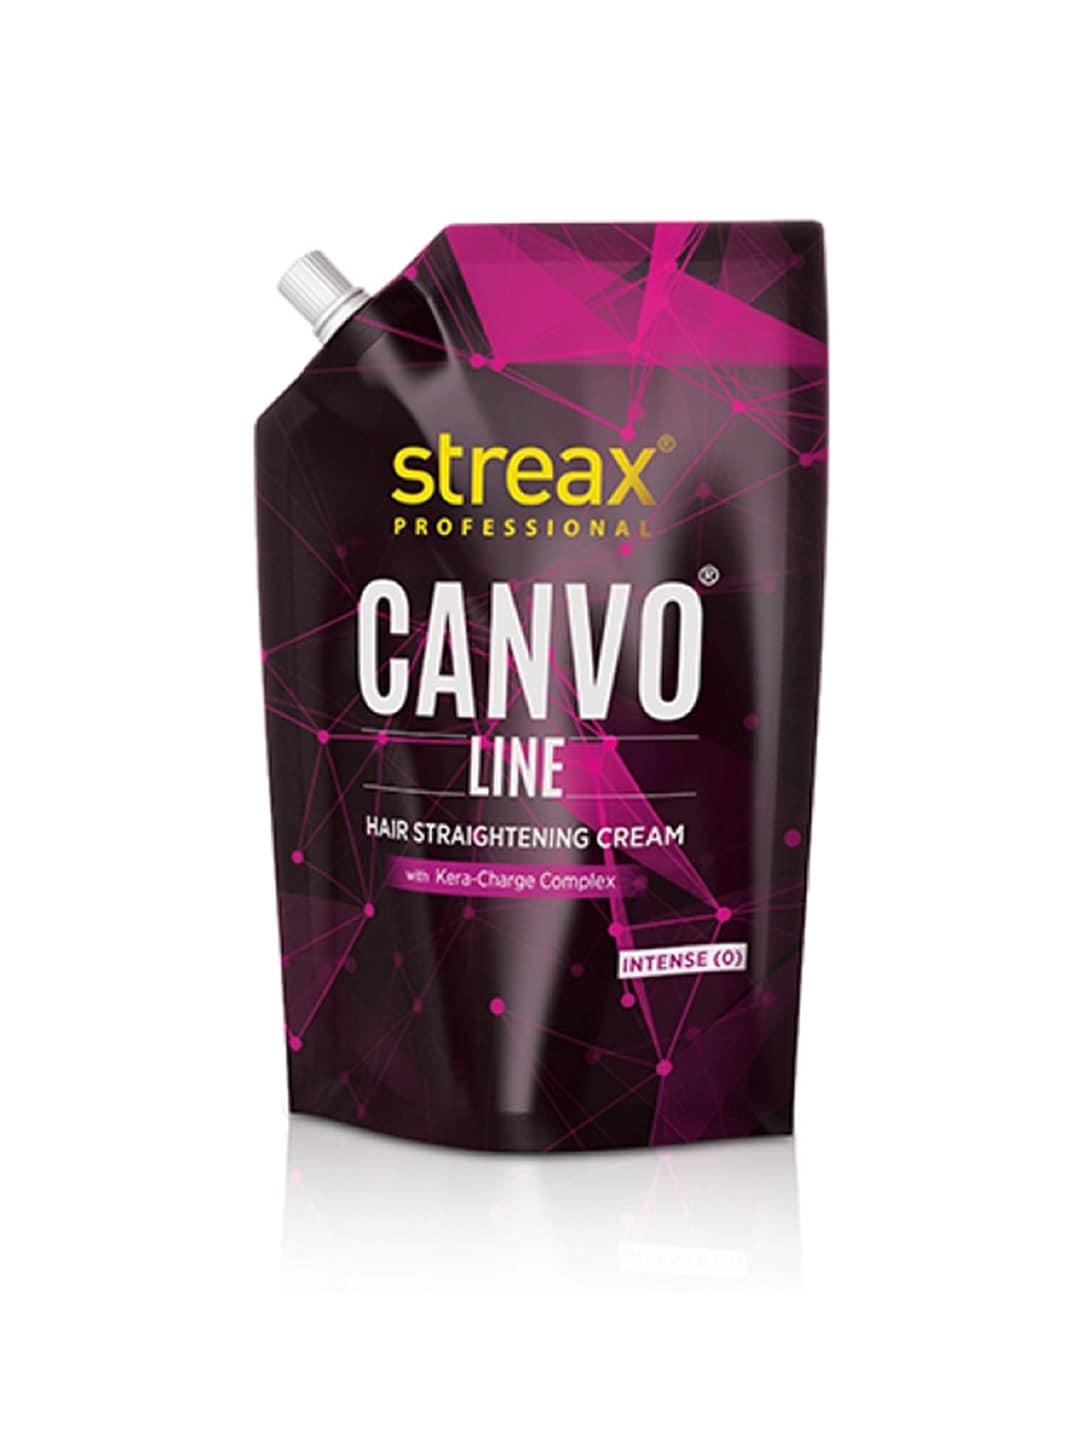 streax professional canvoline hair straightening cream with kera-charge 500 g - intense